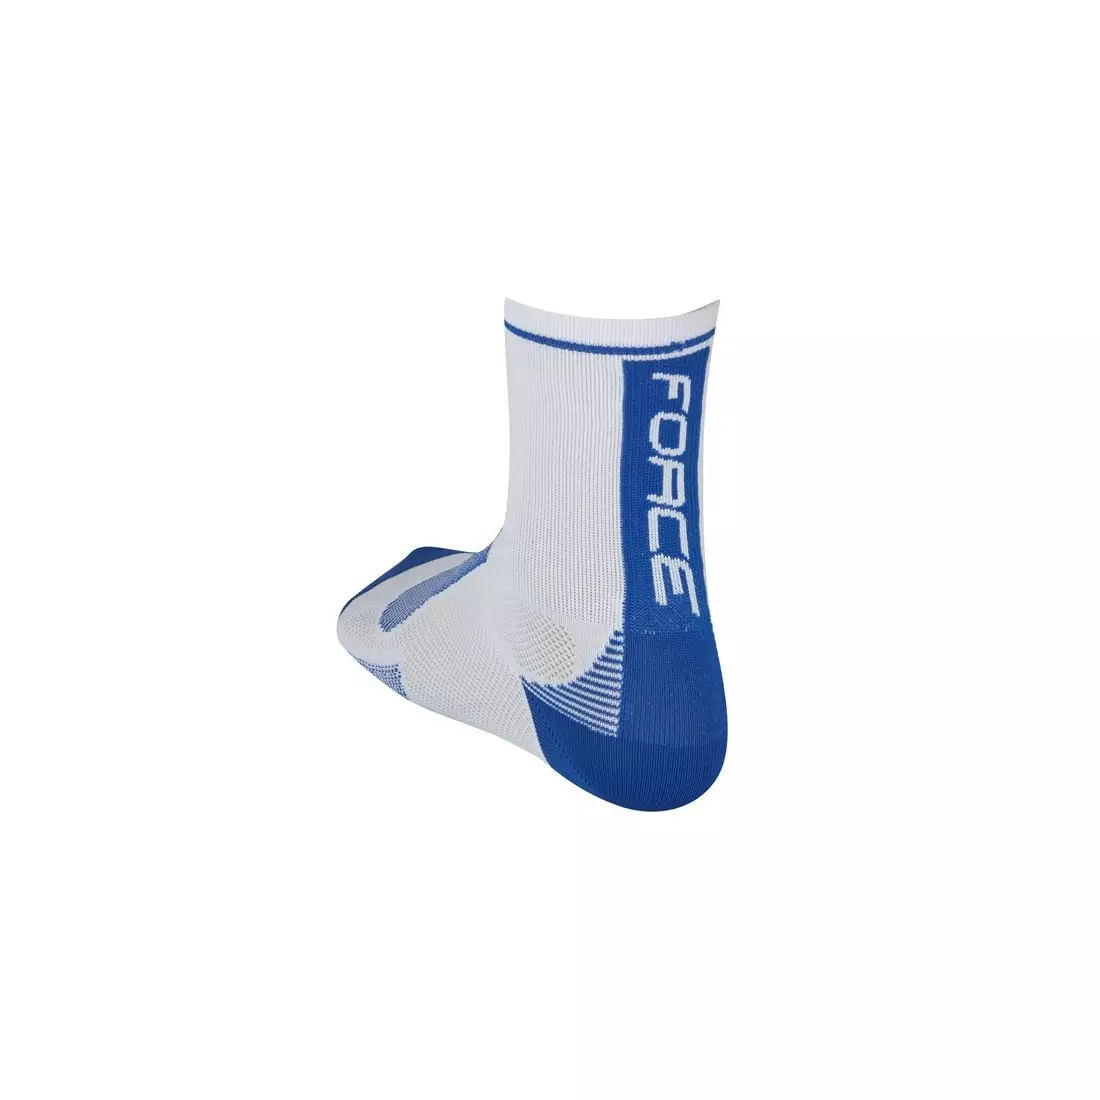 FORCE Sports socks LONG, white and blue